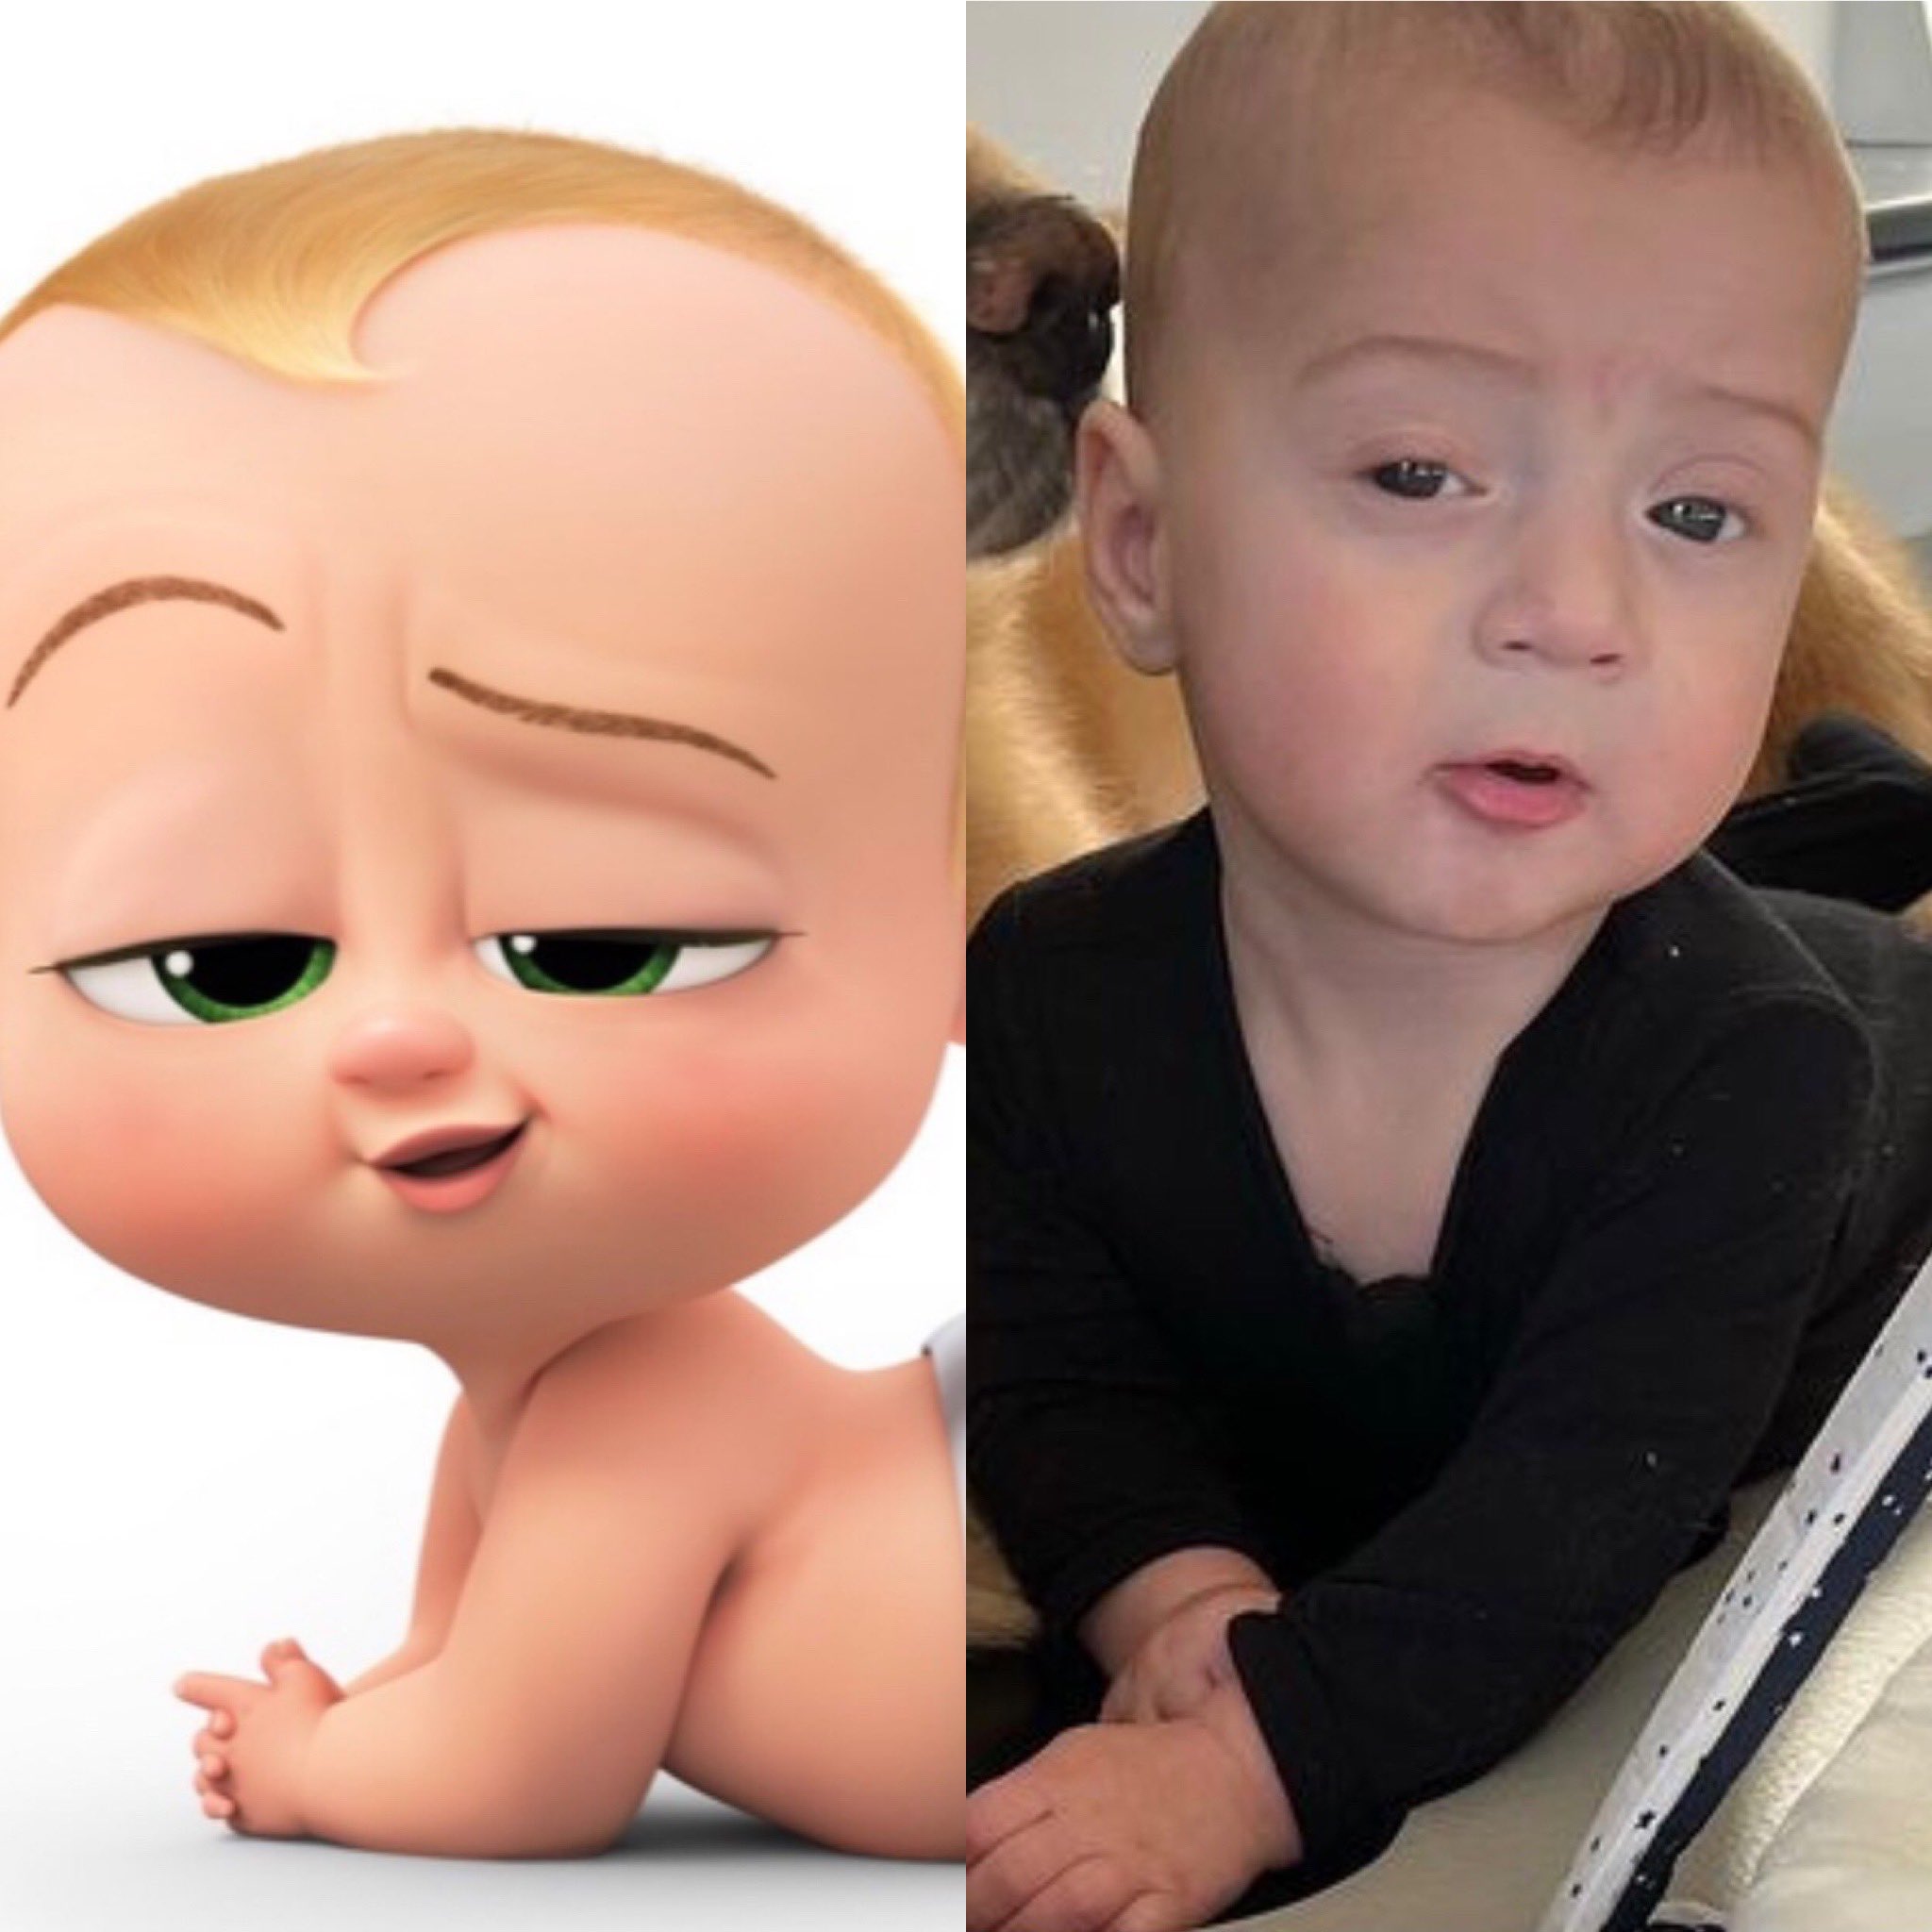 krænkelse spørgeskema Børnehave Mike The Situation ☝🏻 on Twitter: "Boss baby Sitch 👶🏼  https://t.co/p0OjXbROWu" / Twitter